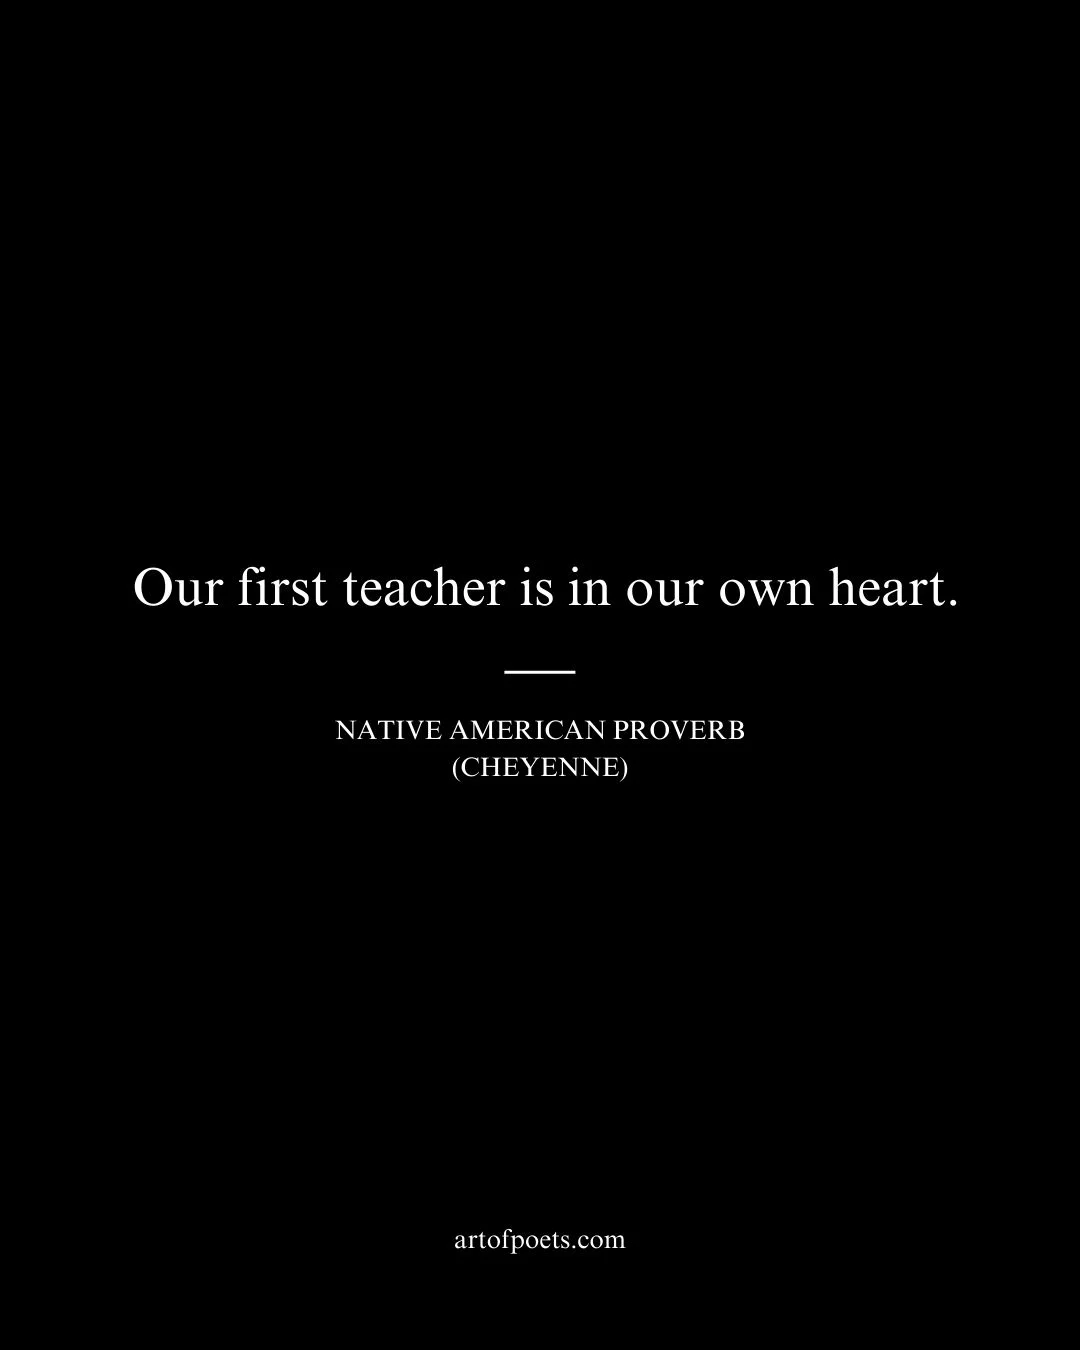 Our first teacher is in our own heart